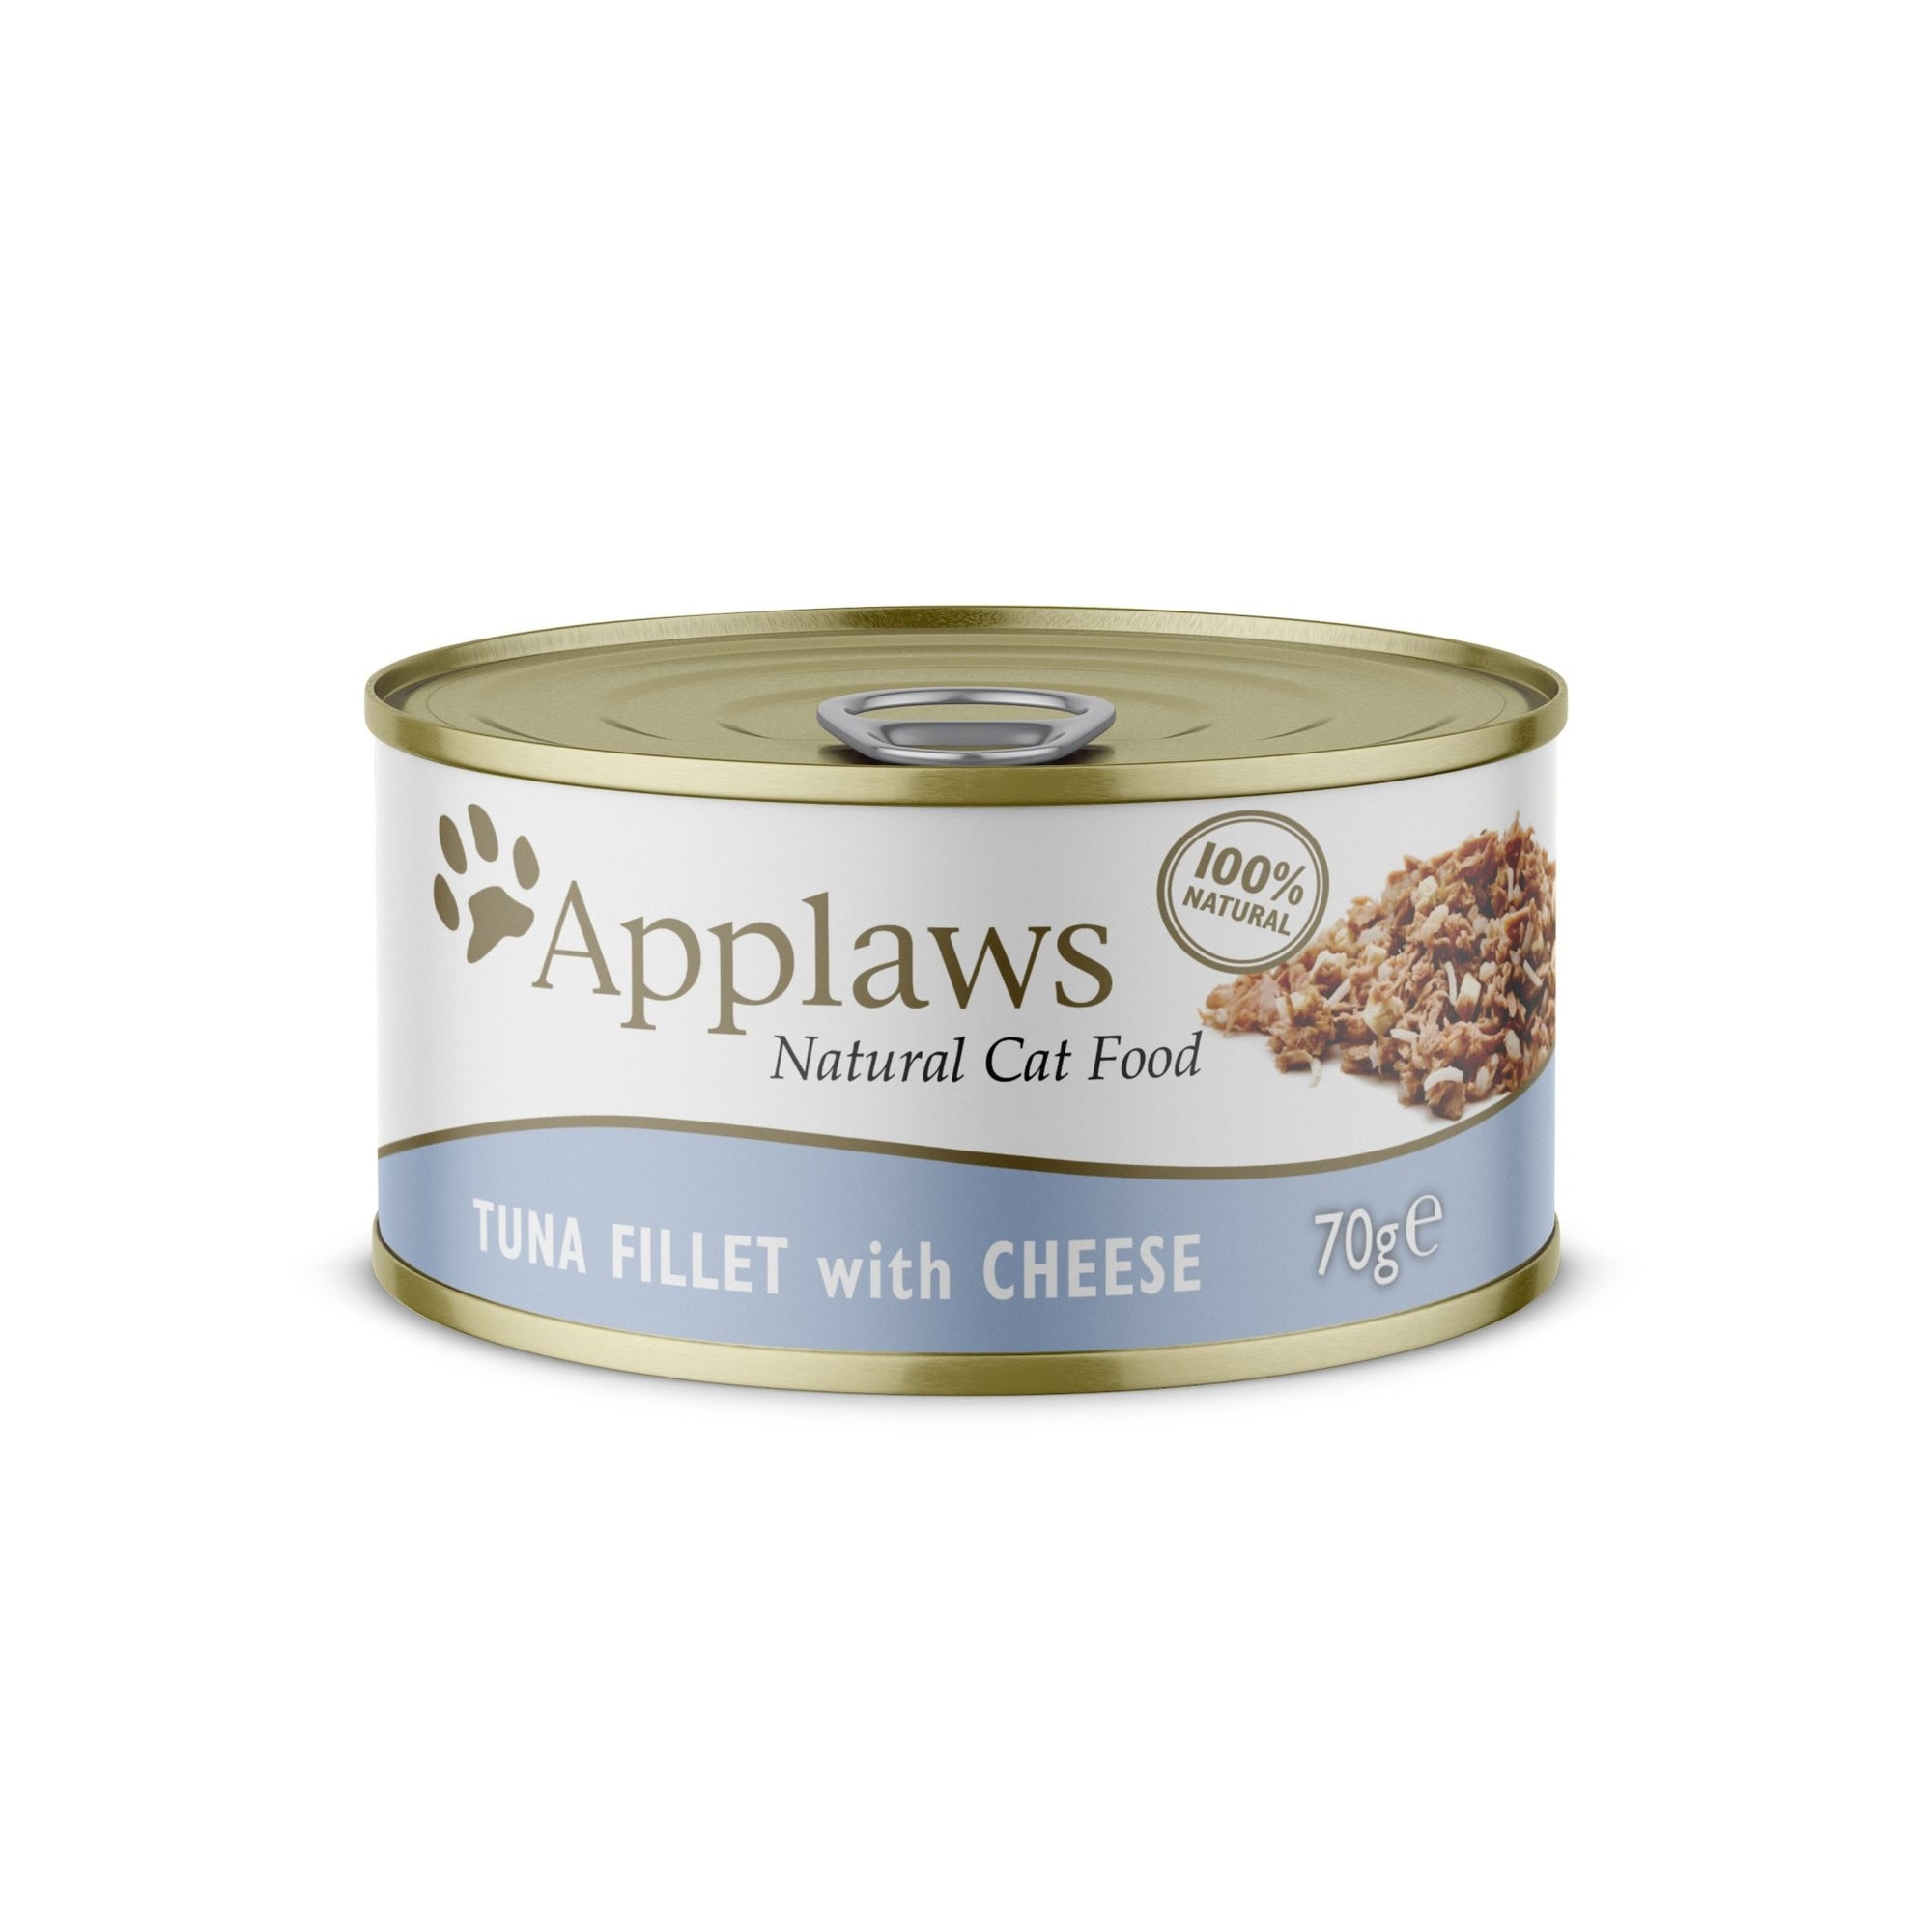 Applaws Cat Tuna Fillets with Cheese in Broth Tins 24 x 70g, Applaws,